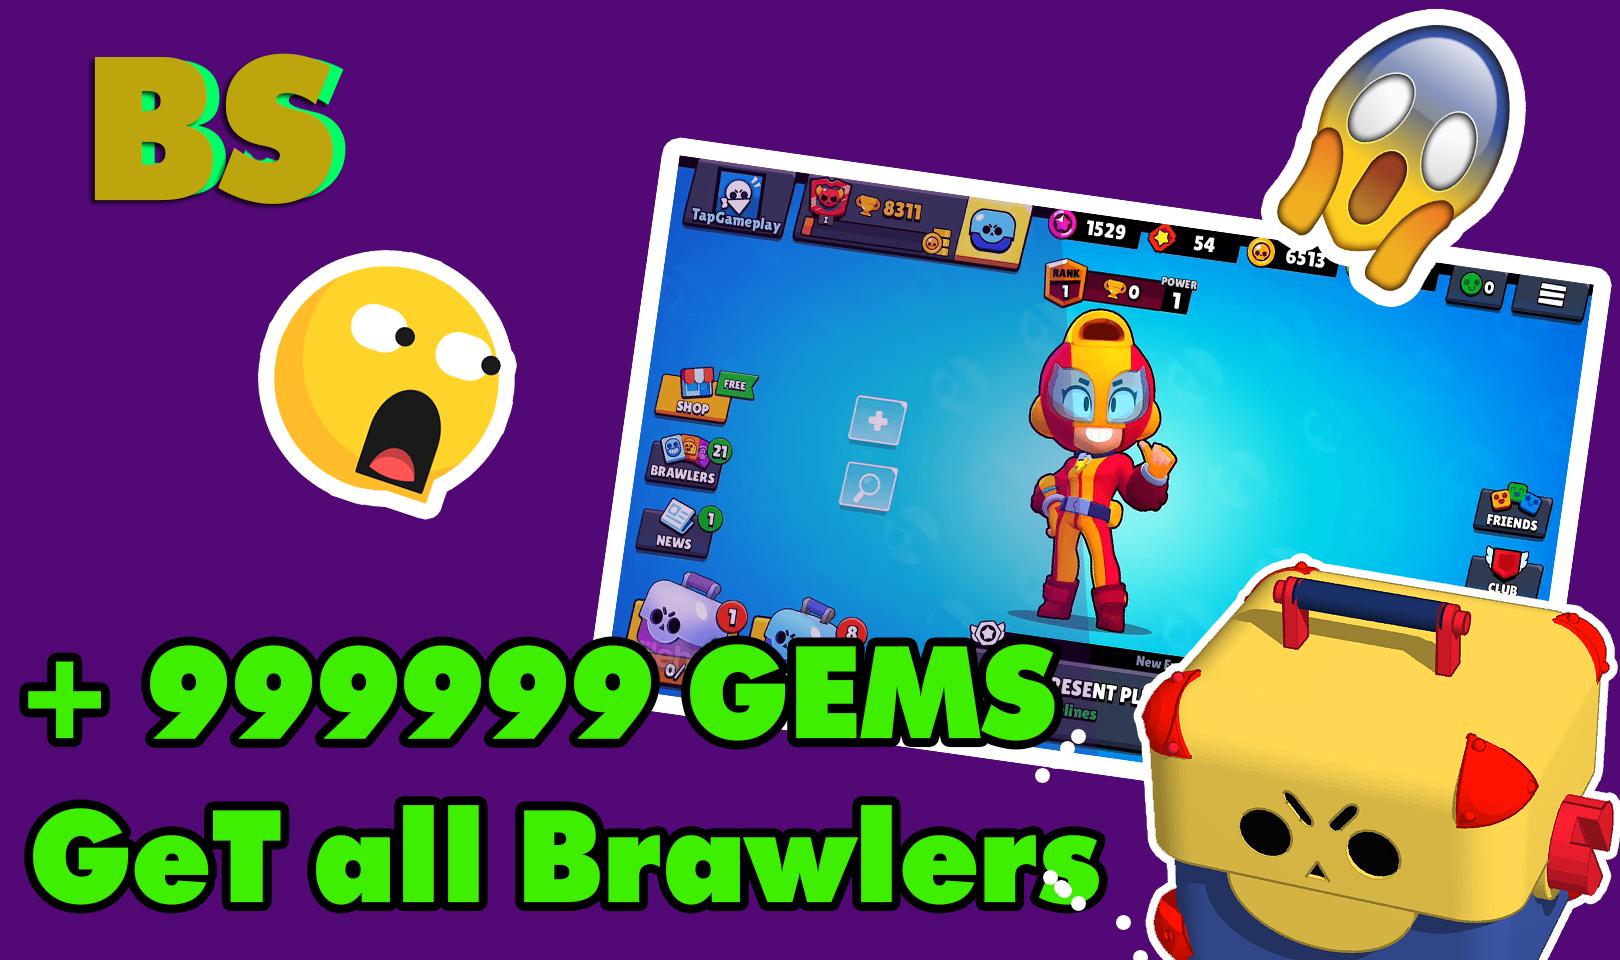 Box Spin Opener For Brawl Stars Gems And Brawlers For Android Apk Download - brawl stars new character spinner